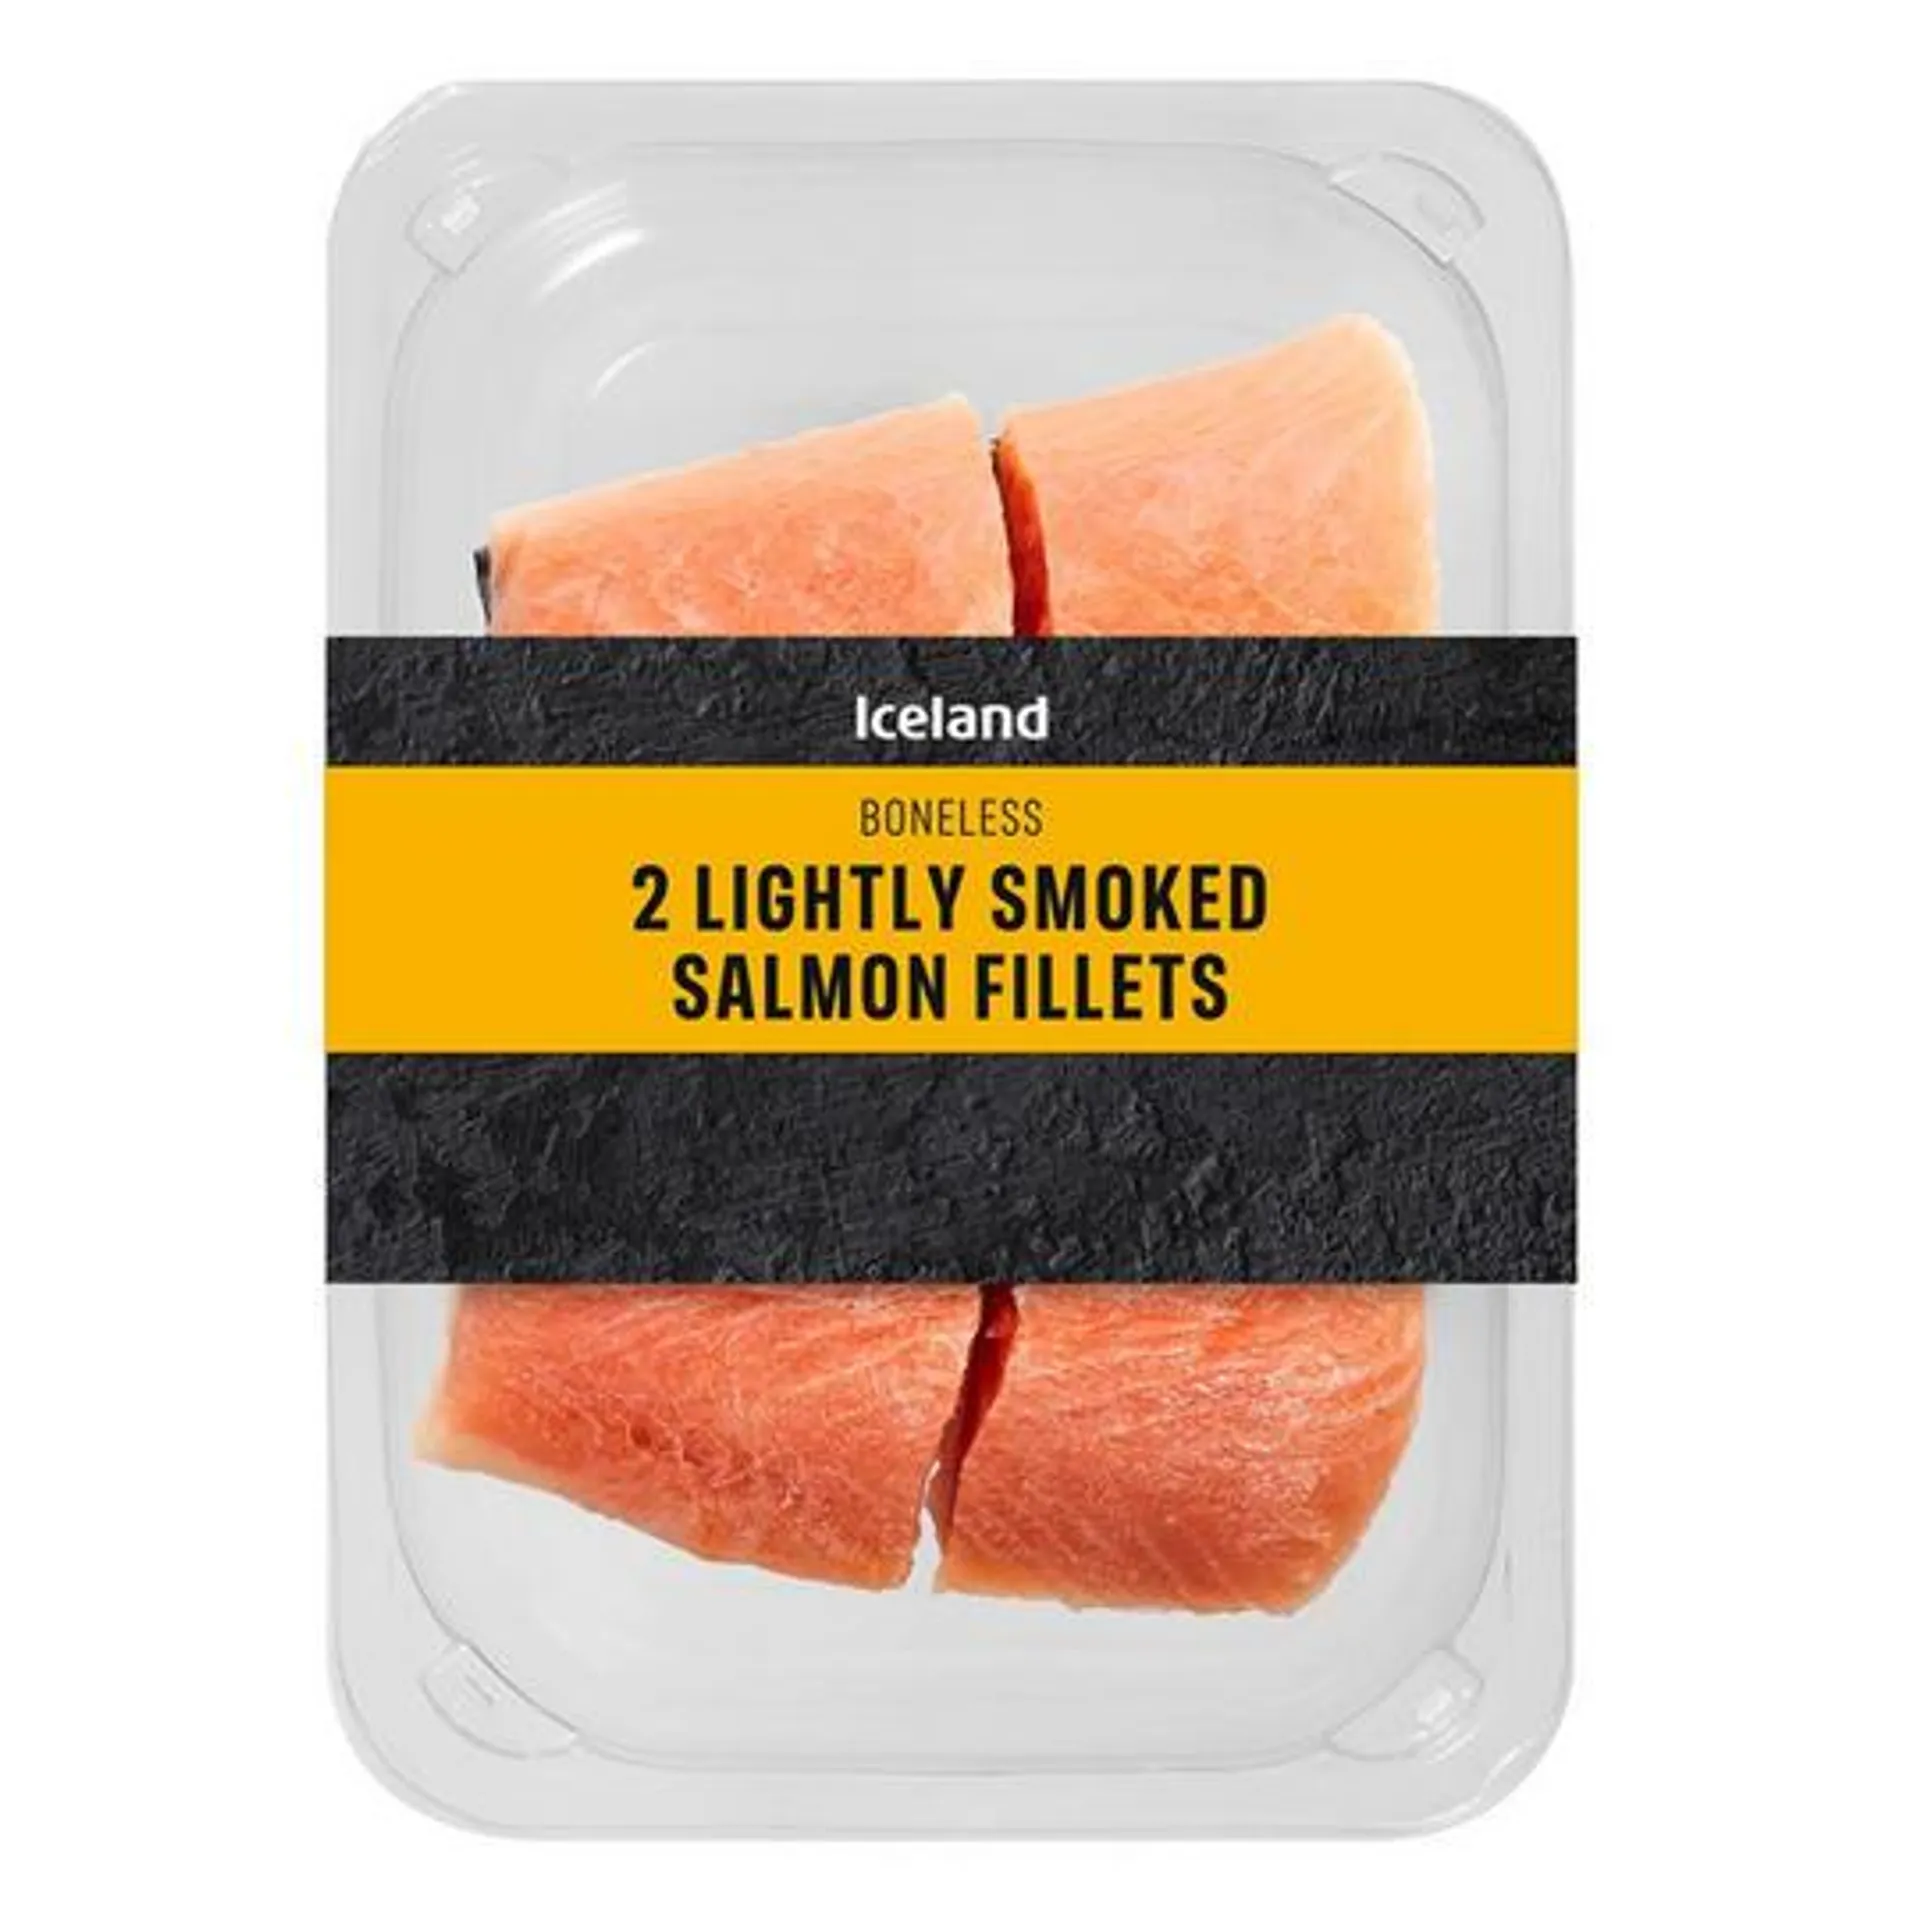 Iceland 2 Lightly Smoked Salmon Fillets 200g